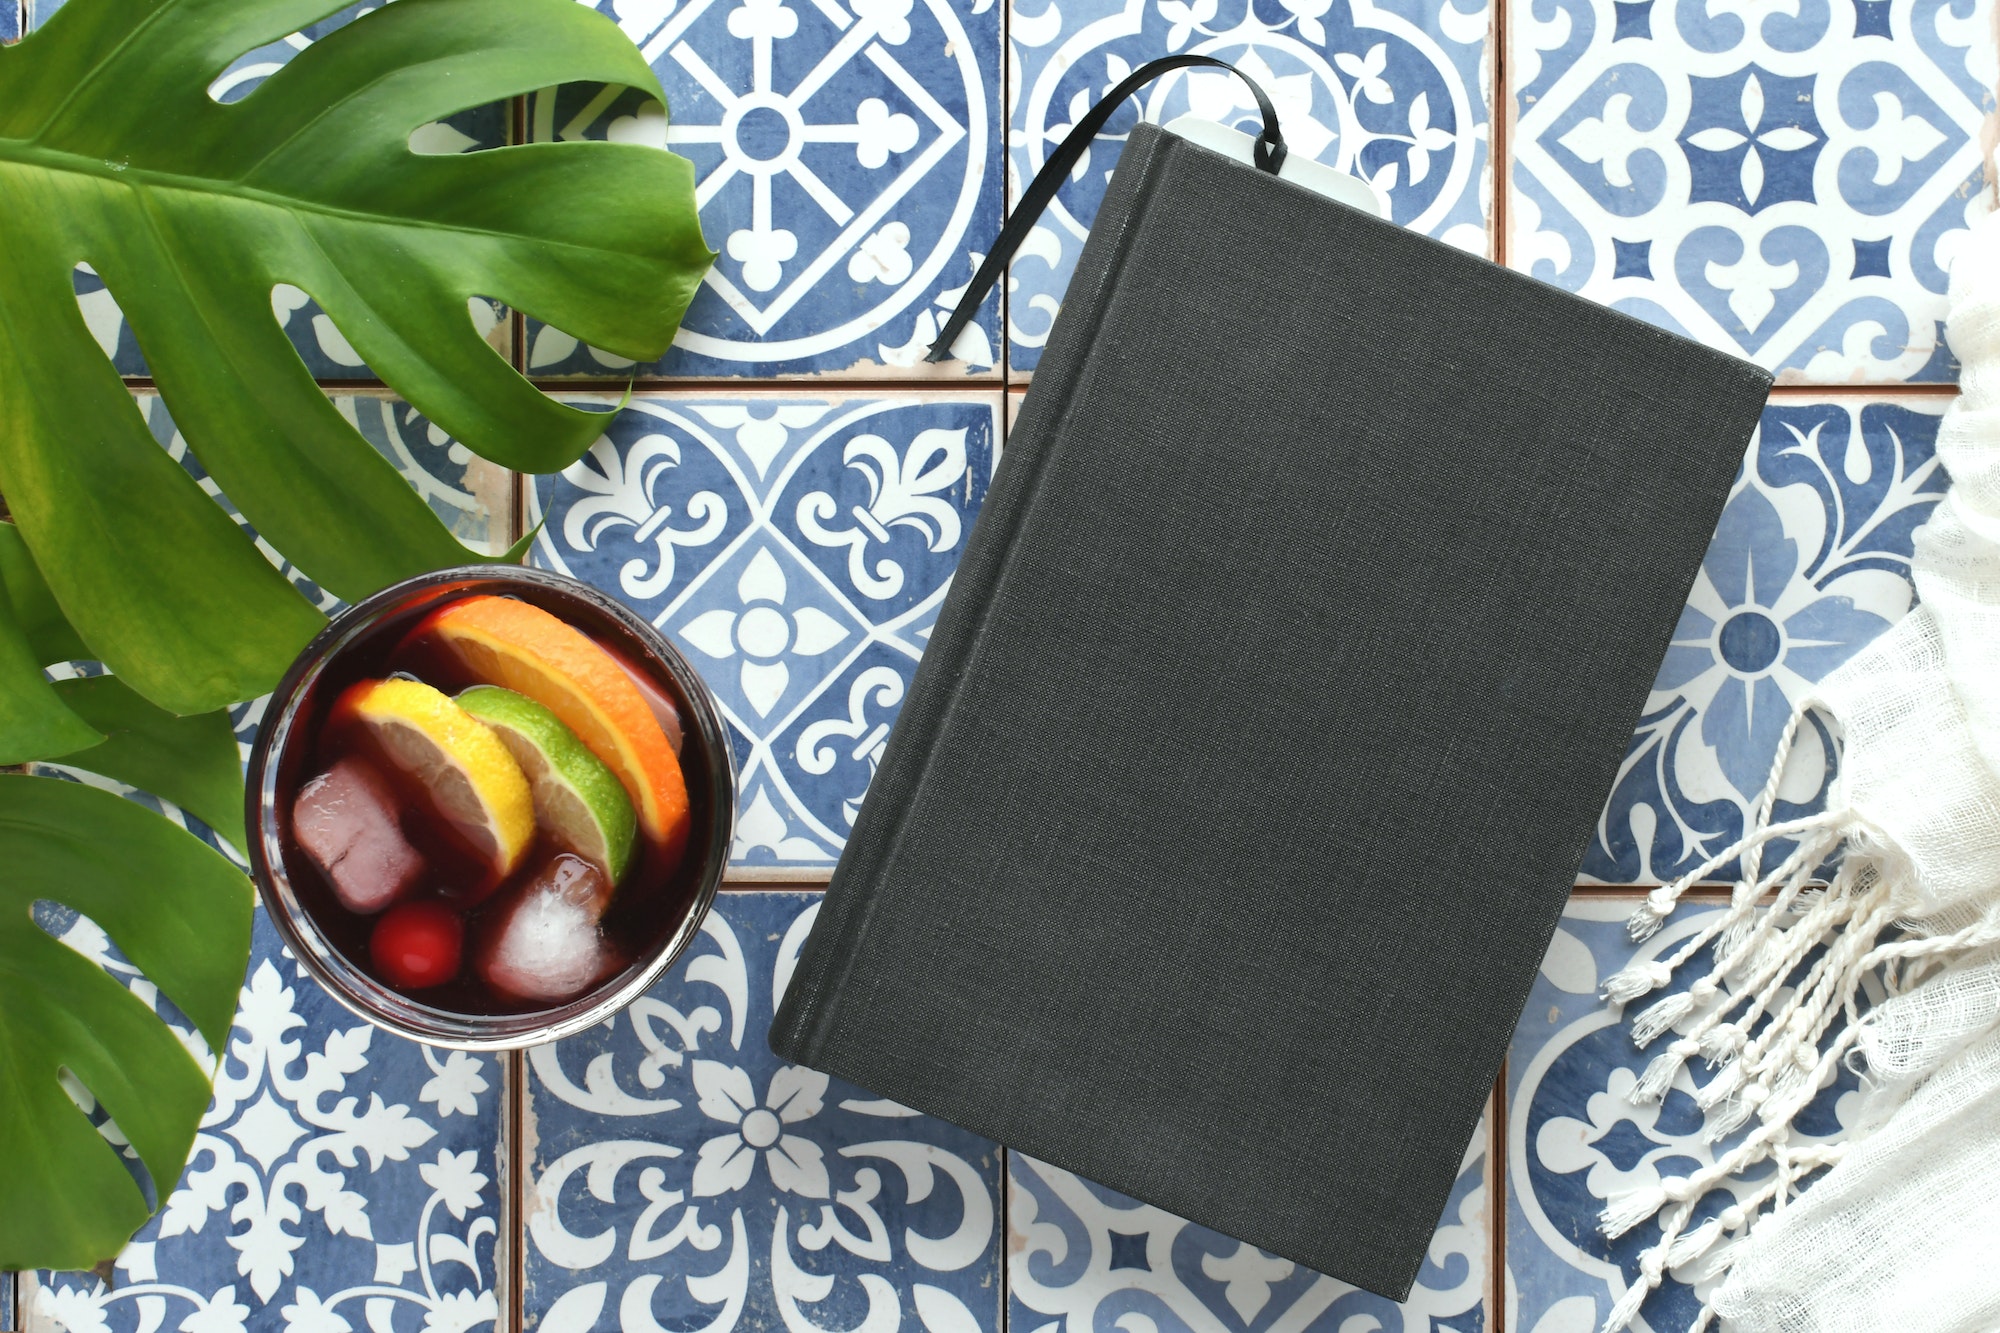 Blank book cover for mock up on mosaic tiles with sangria for exotic travel vibe, background